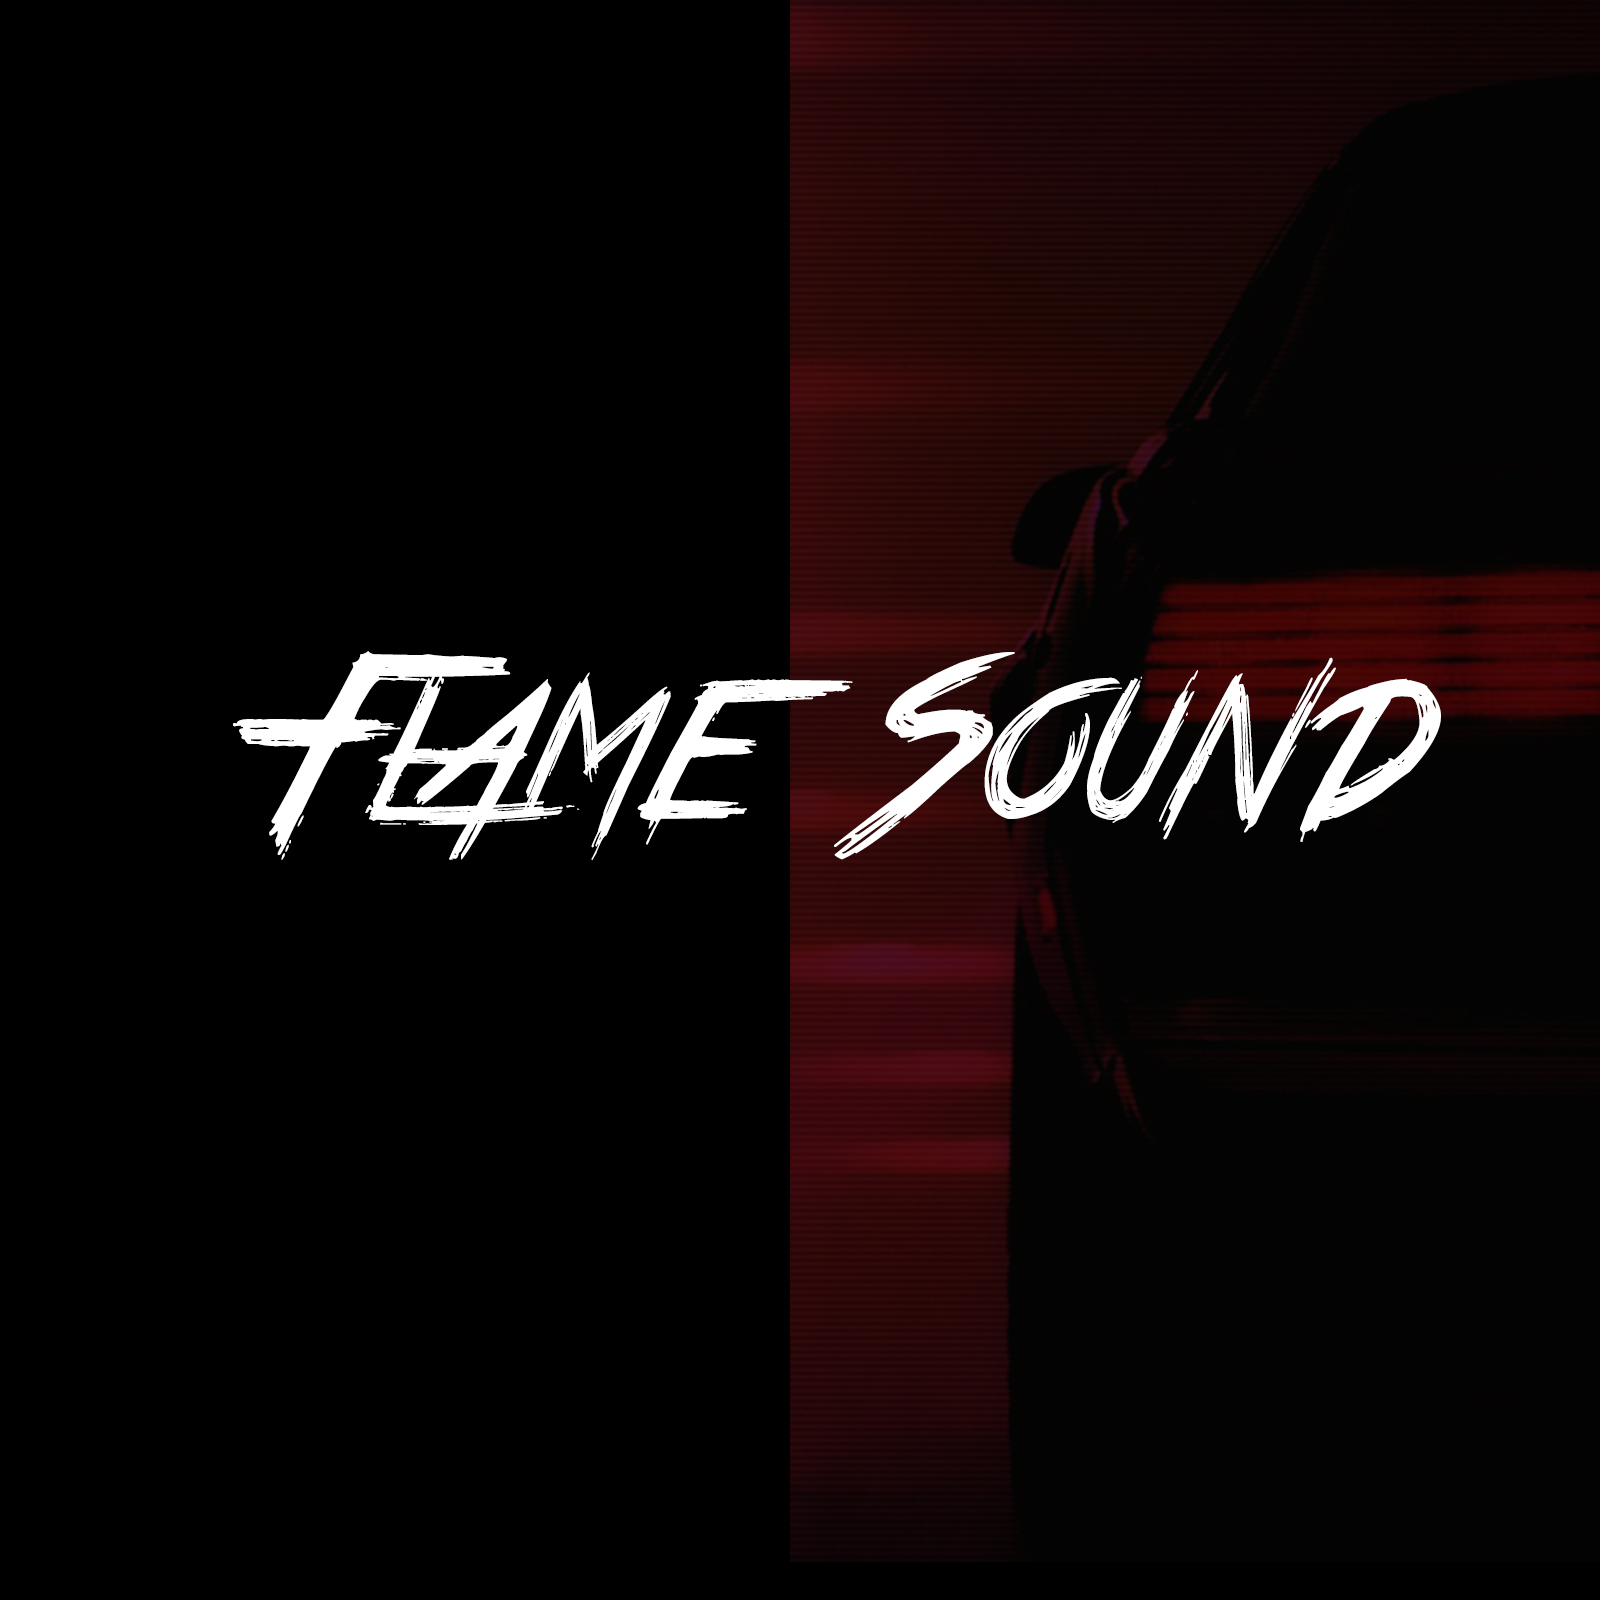 Flame Sound track ghost producer